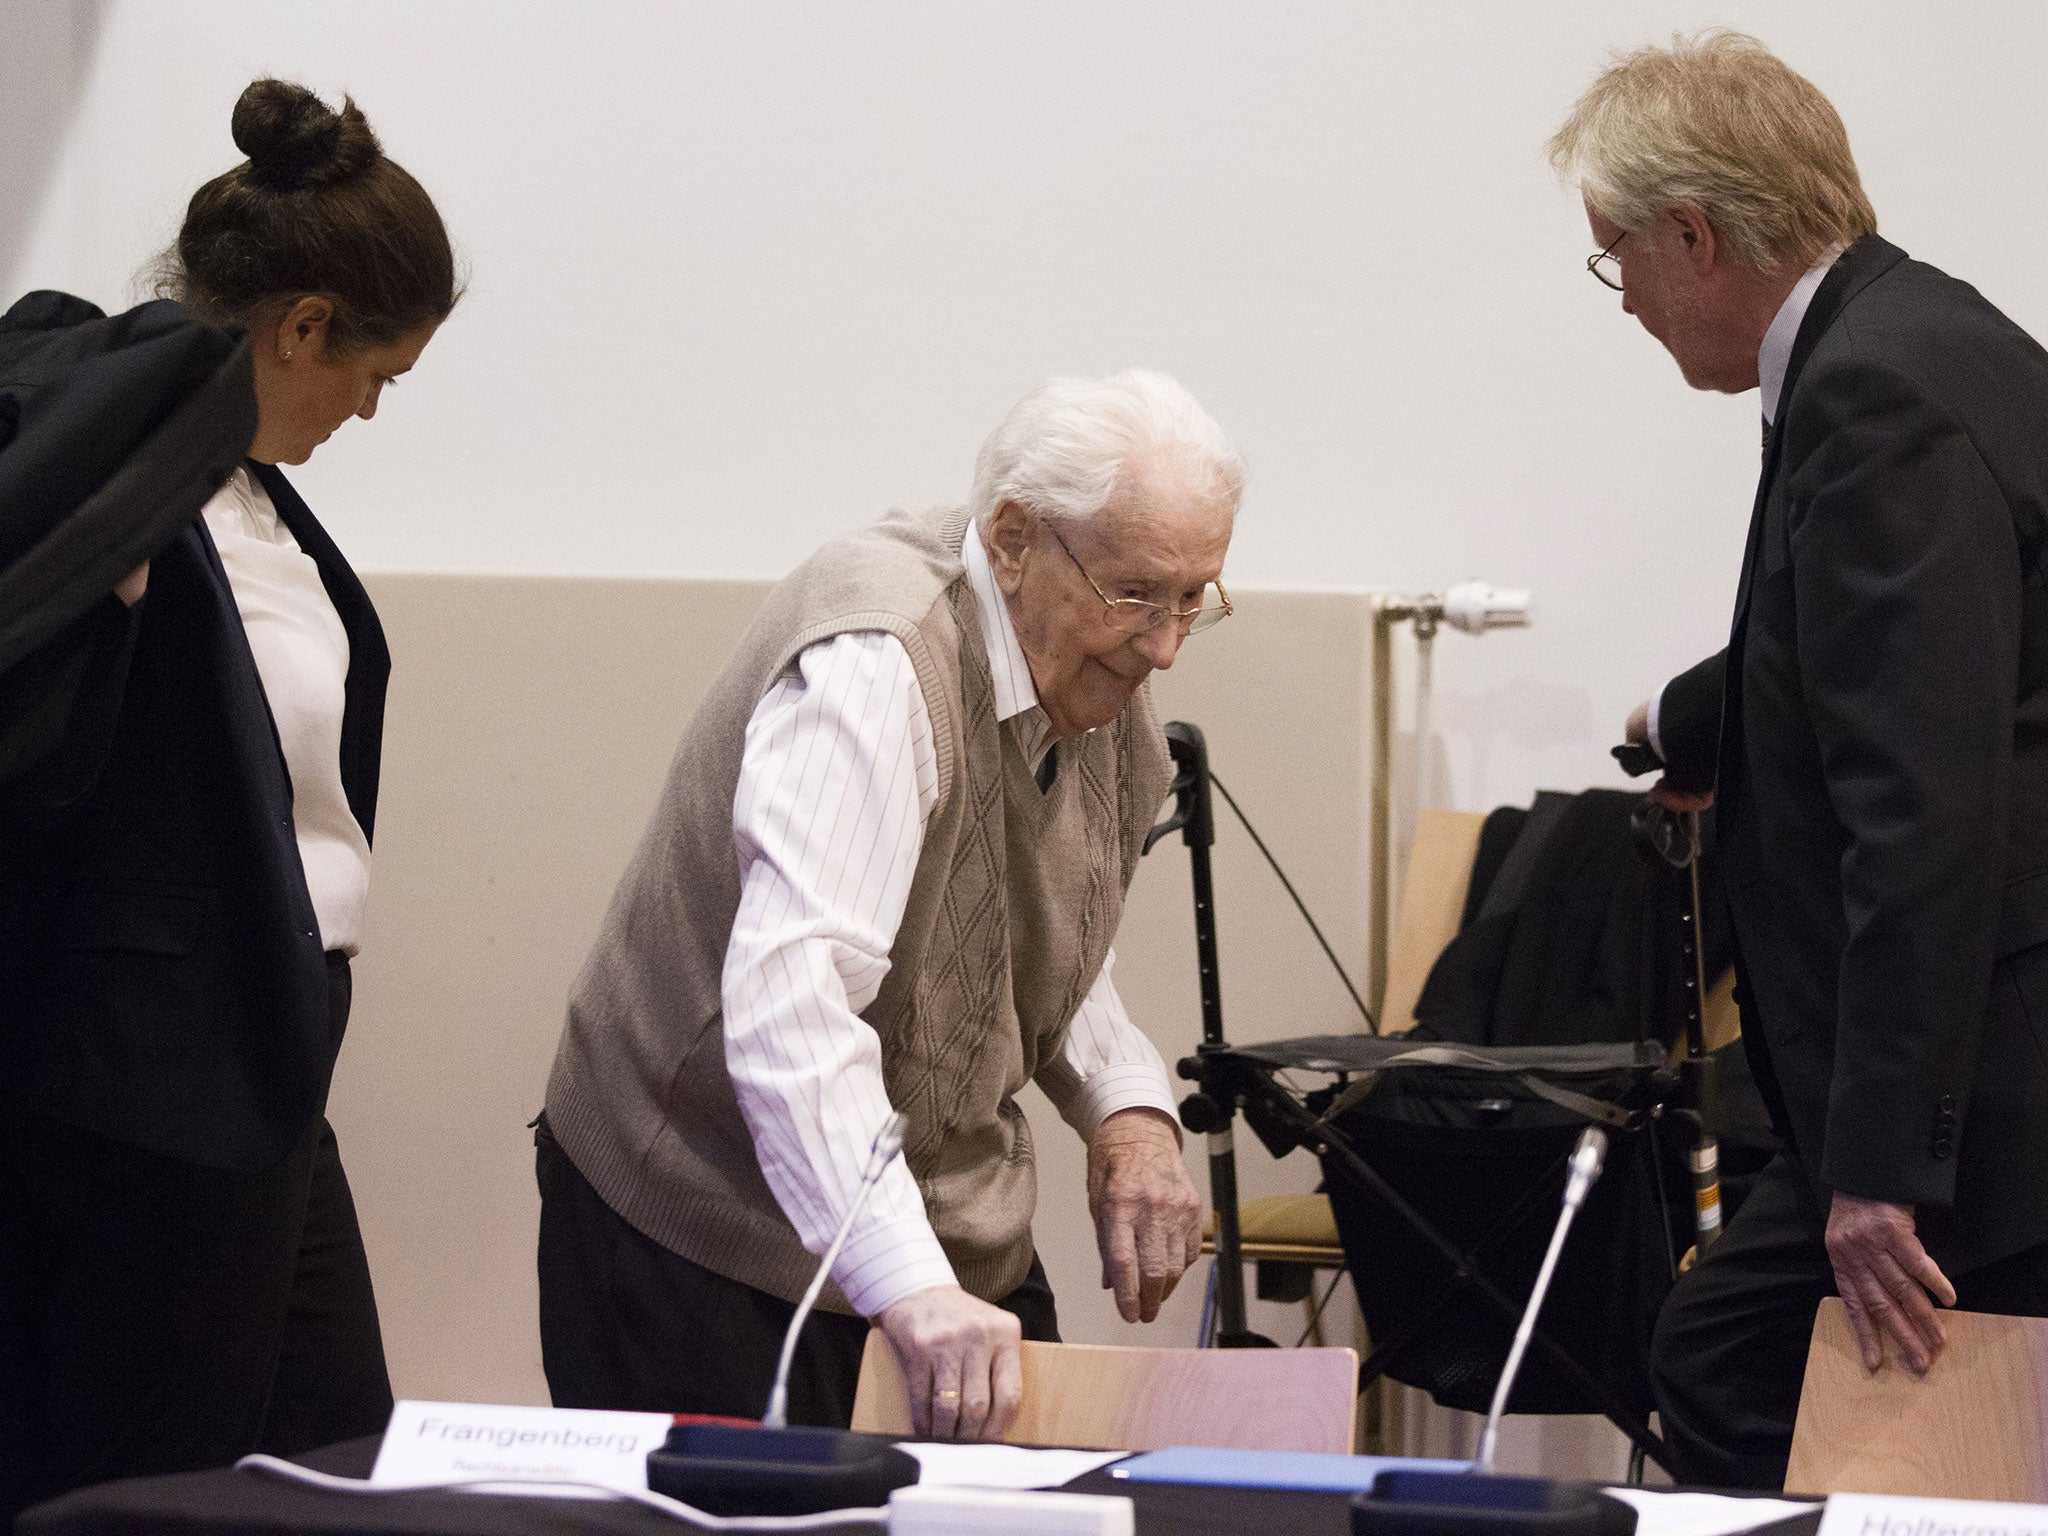 Oskar Groening, 93, arrives for the first day of his trial to face charges of being accomplice to the murder of 300,000 people at the Auschwitz concentration camp